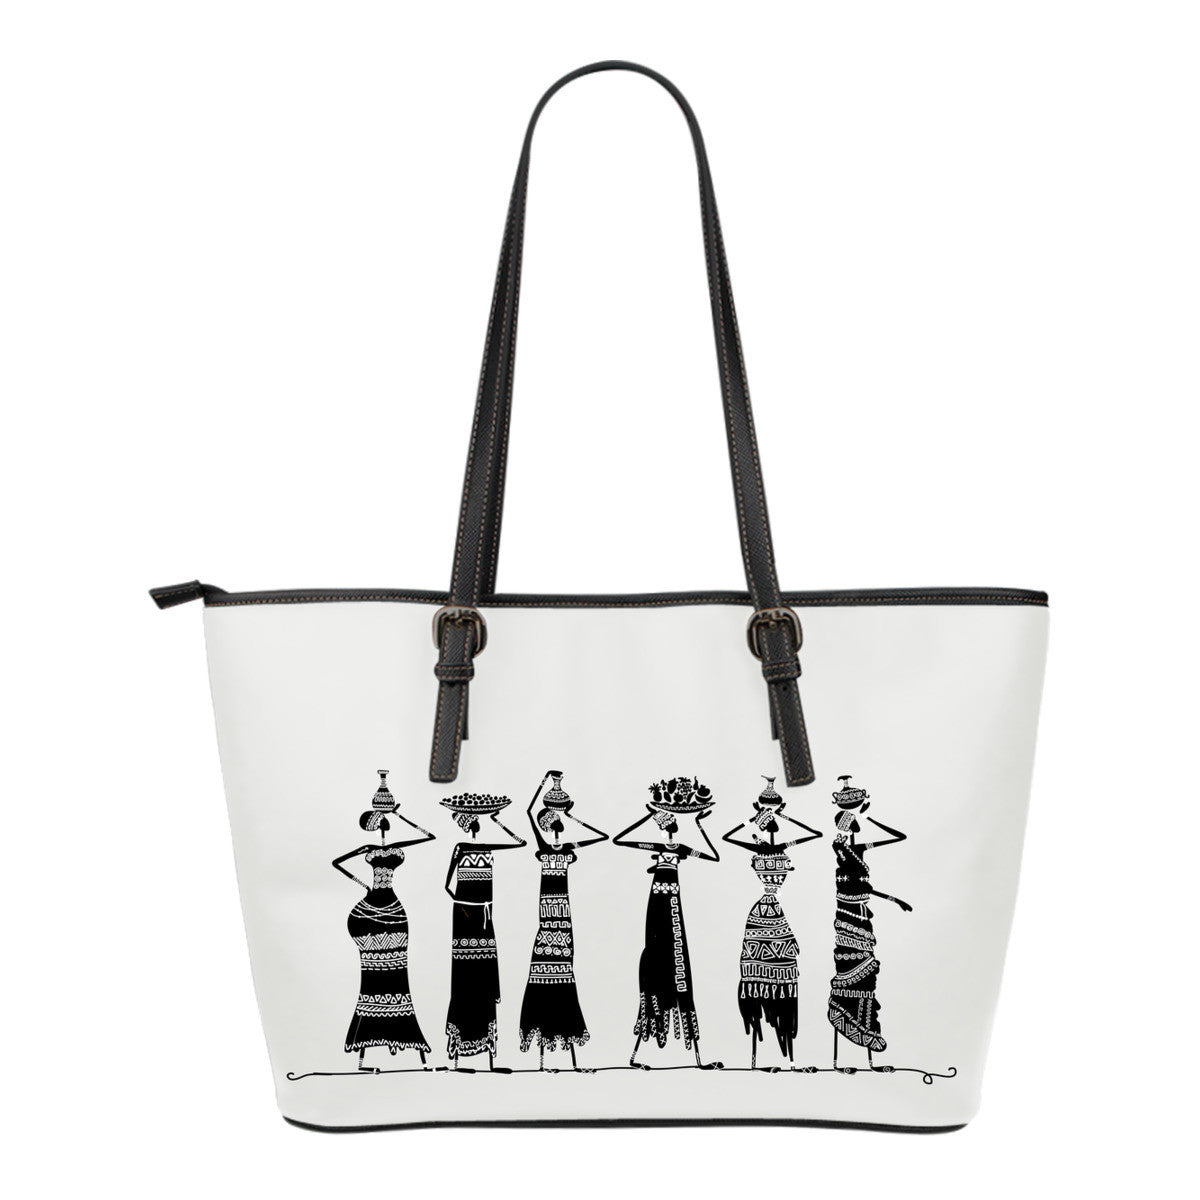 Ethnic Women Small Leather Tote Bags - 9 styles available